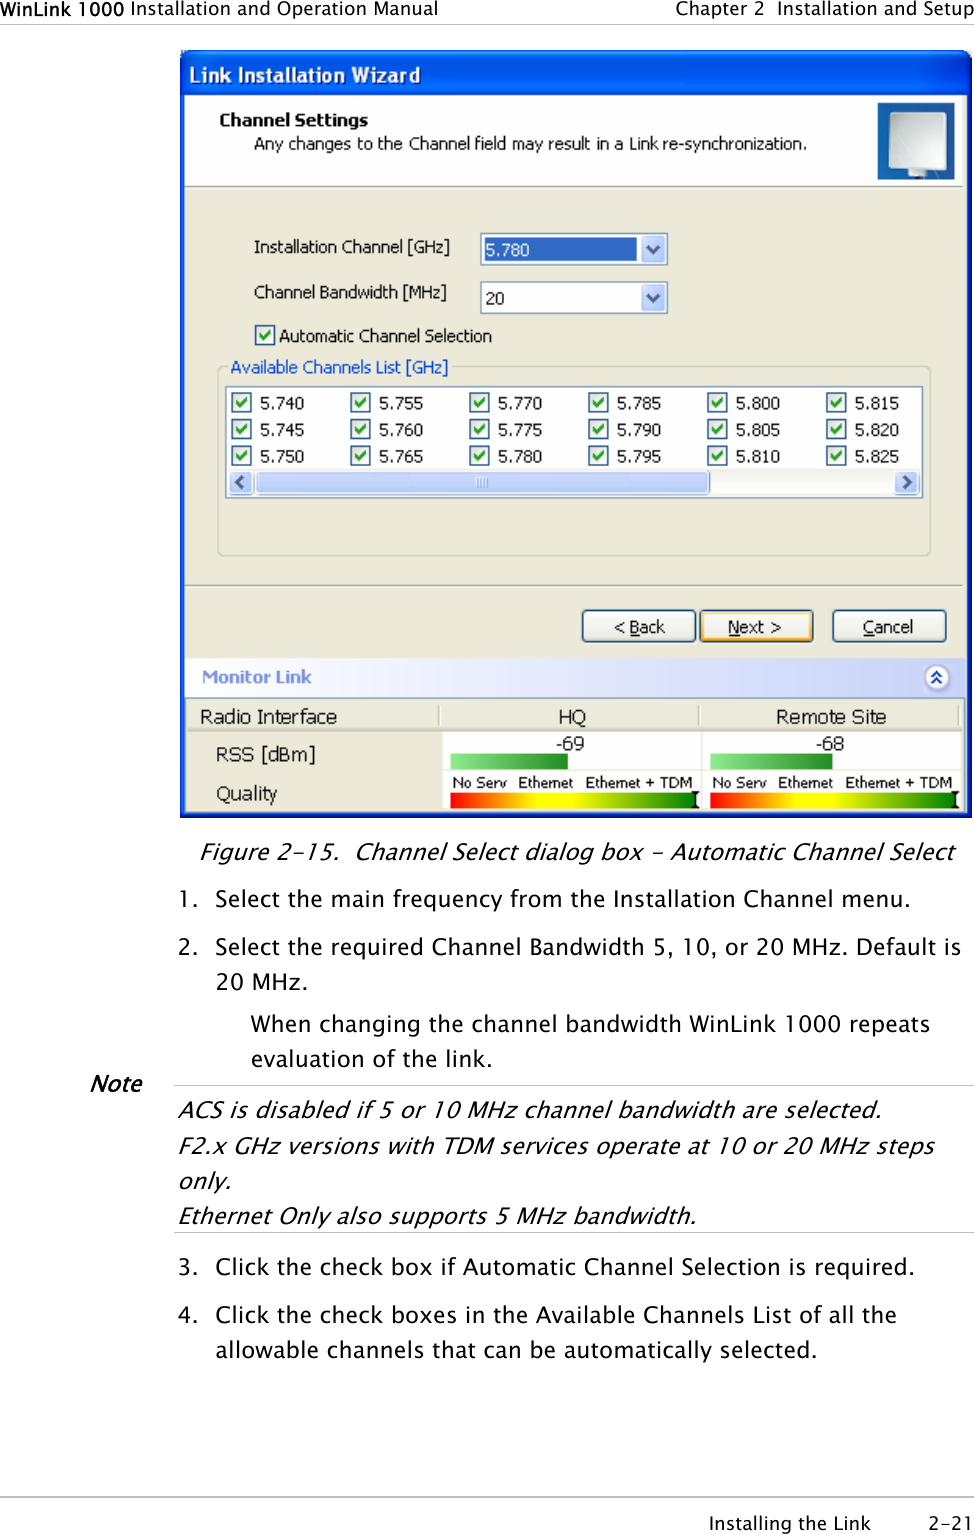 WinLink 1000 Installation and Operation Manual  Chapter  2  Installation and Setup  Figure  2-15.  Channel Select dialog box - Automatic Channel Select 1. Select the main frequency from the Installation Channel menu. 2. Select the required Channel Bandwidth 5, 10, or 20 MHz. Default is 20 MHz. When changing the channel bandwidth WinLink 1000 repeats evaluation of the link.  Note ACS is disabled if 5 or 10 MHz channel bandwidth are selected. F2.x GHz versions with TDM services operate at 10 or 20 MHz steps only. Ethernet Only also suppor s 5 MHz bandwidth. t 3. Click the check box if Automatic Channel Selection is required. 4. Click the check boxes in the Available Channels List of all the allowable channels that can be automatically selected.  Installing the Link  2-21 